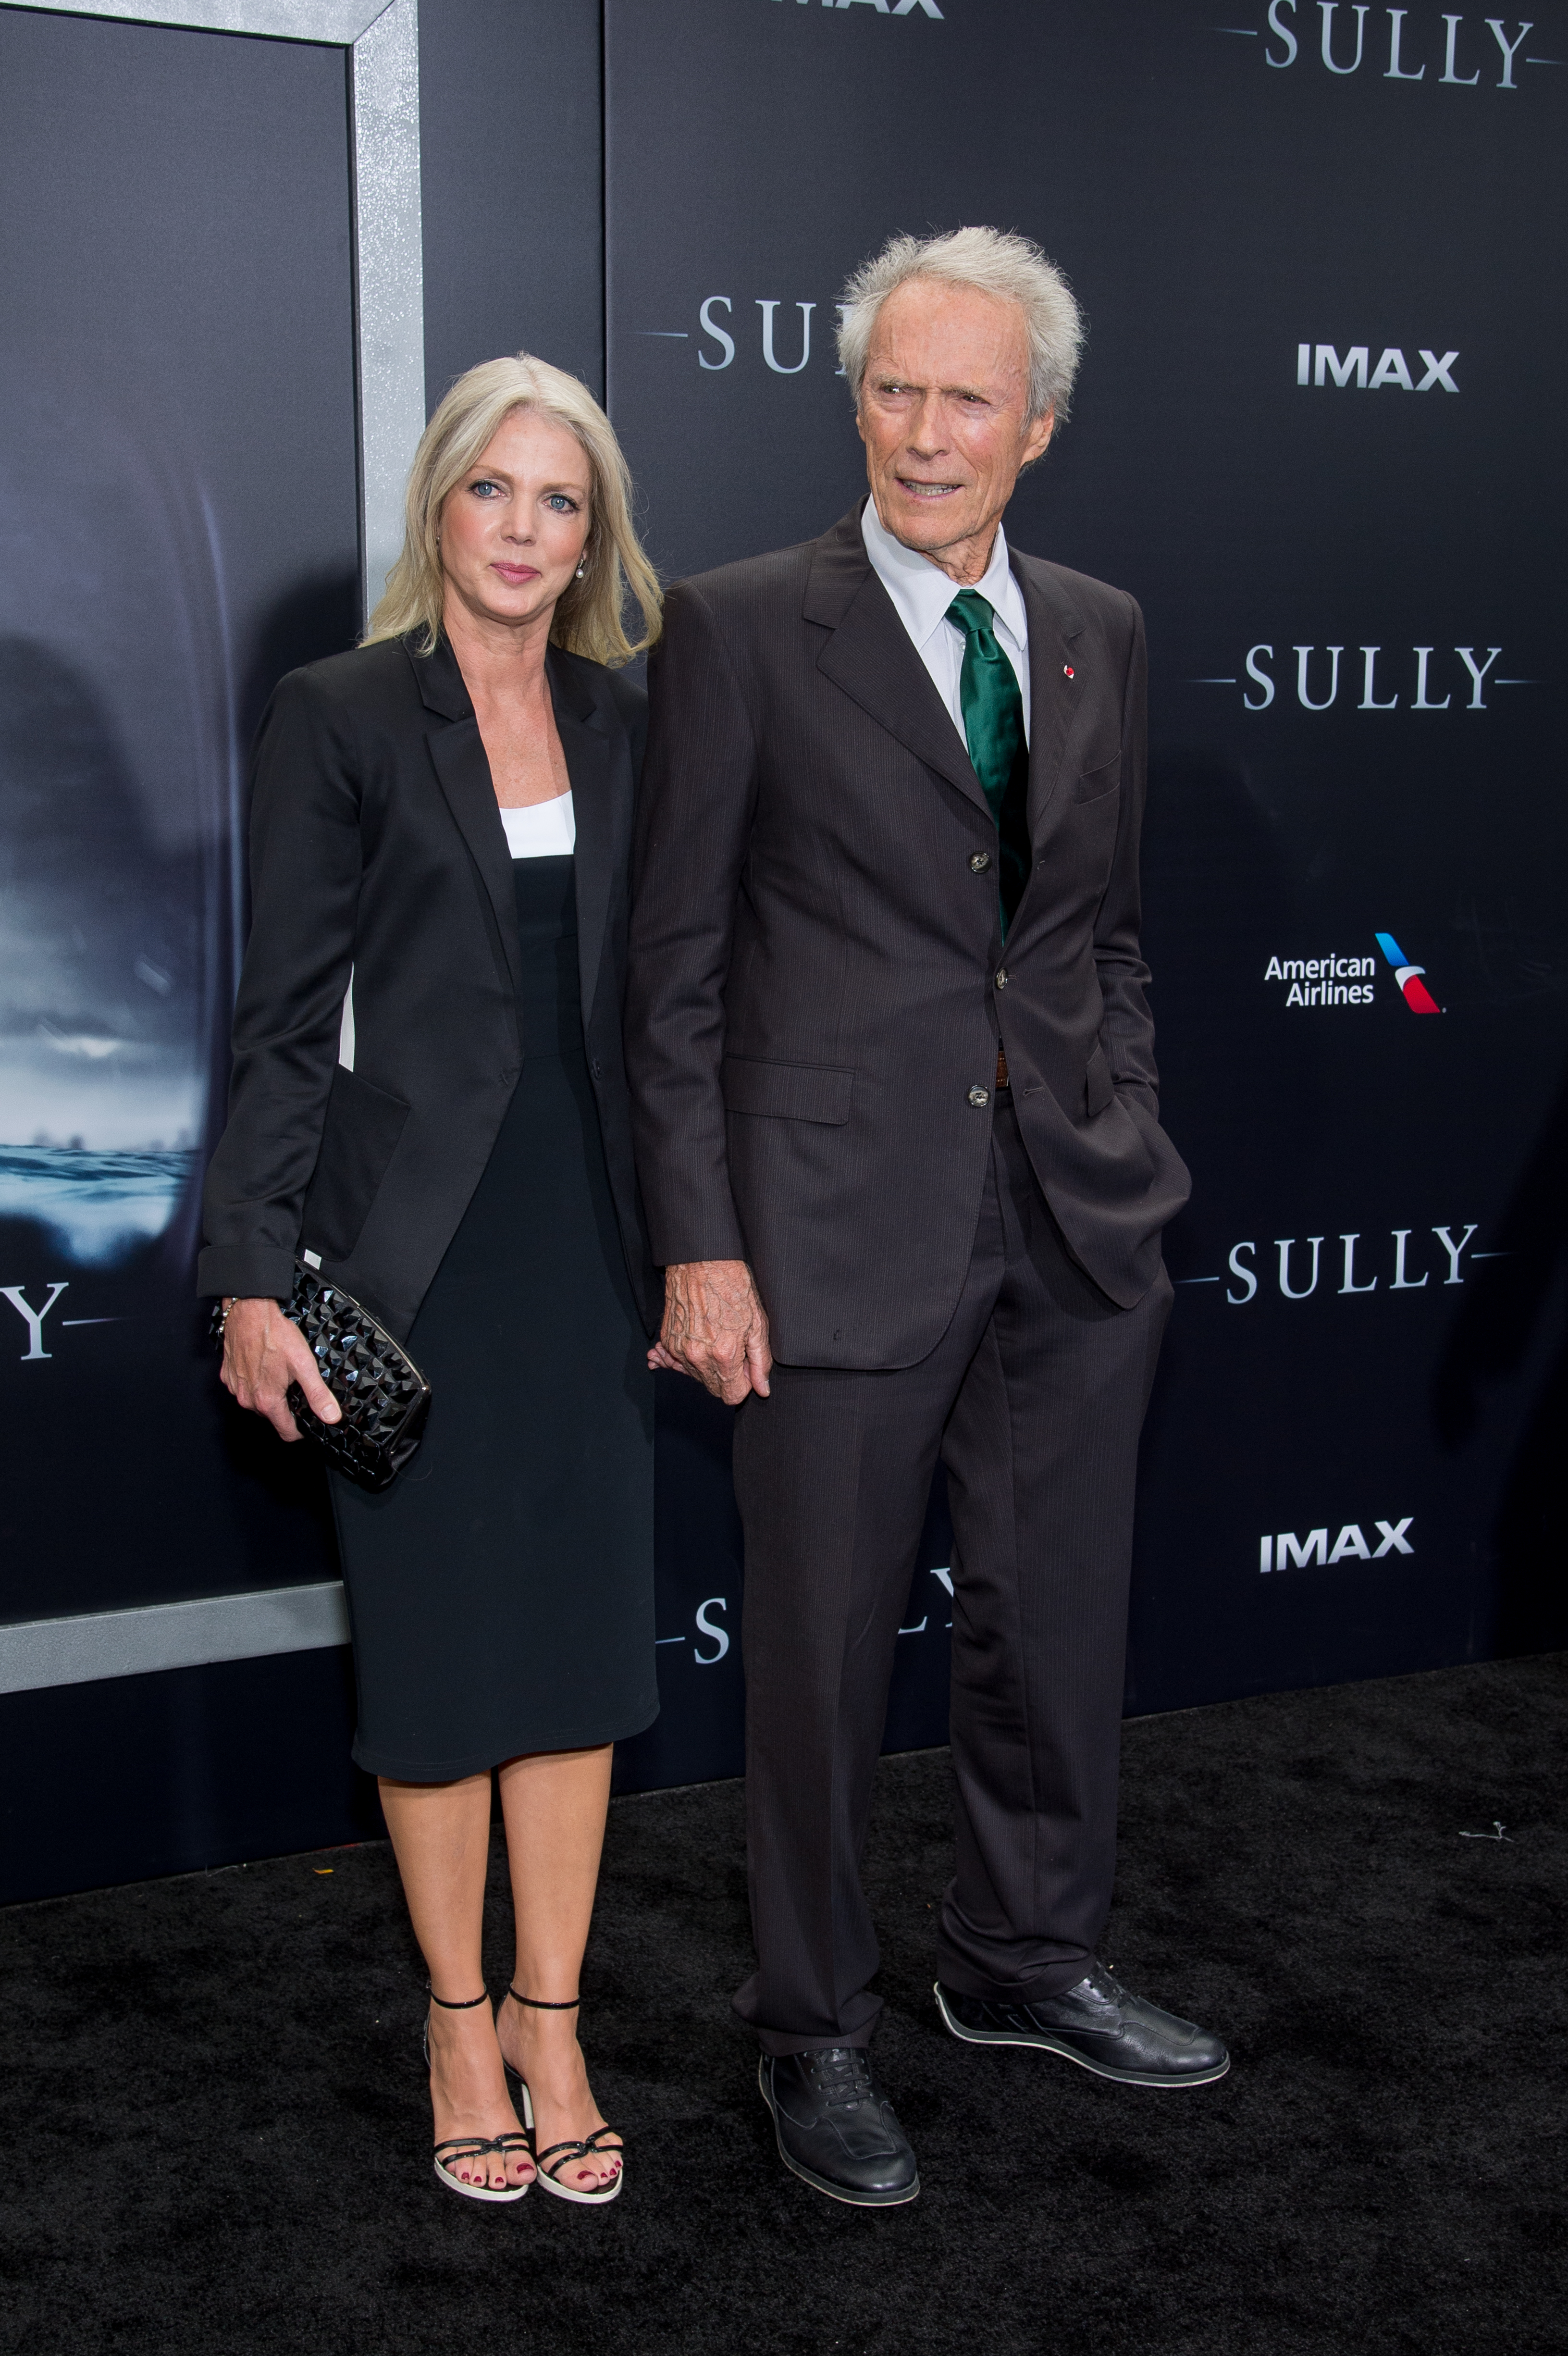 Christina Sandera and Clint Eastwood attend the Sully New York premiere